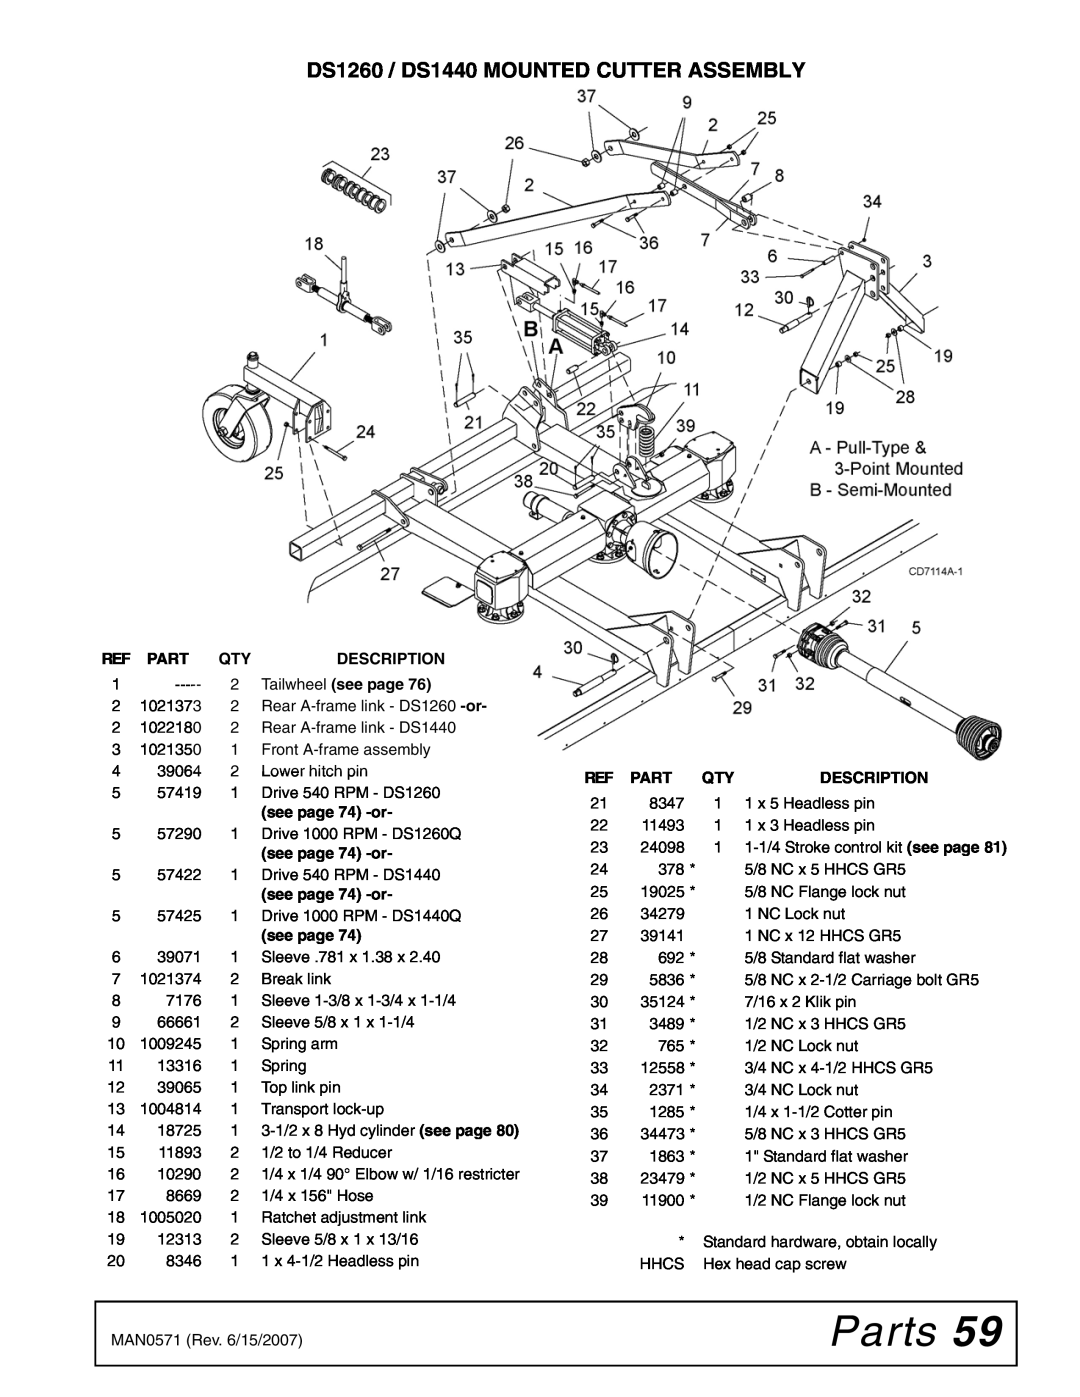 Woods Equipment DS1260Q Parts, DS1260 / DS1440 MOUNTED CUTTER ASSEMBLY, Description, Tailwheel see page, see page 74 -or 